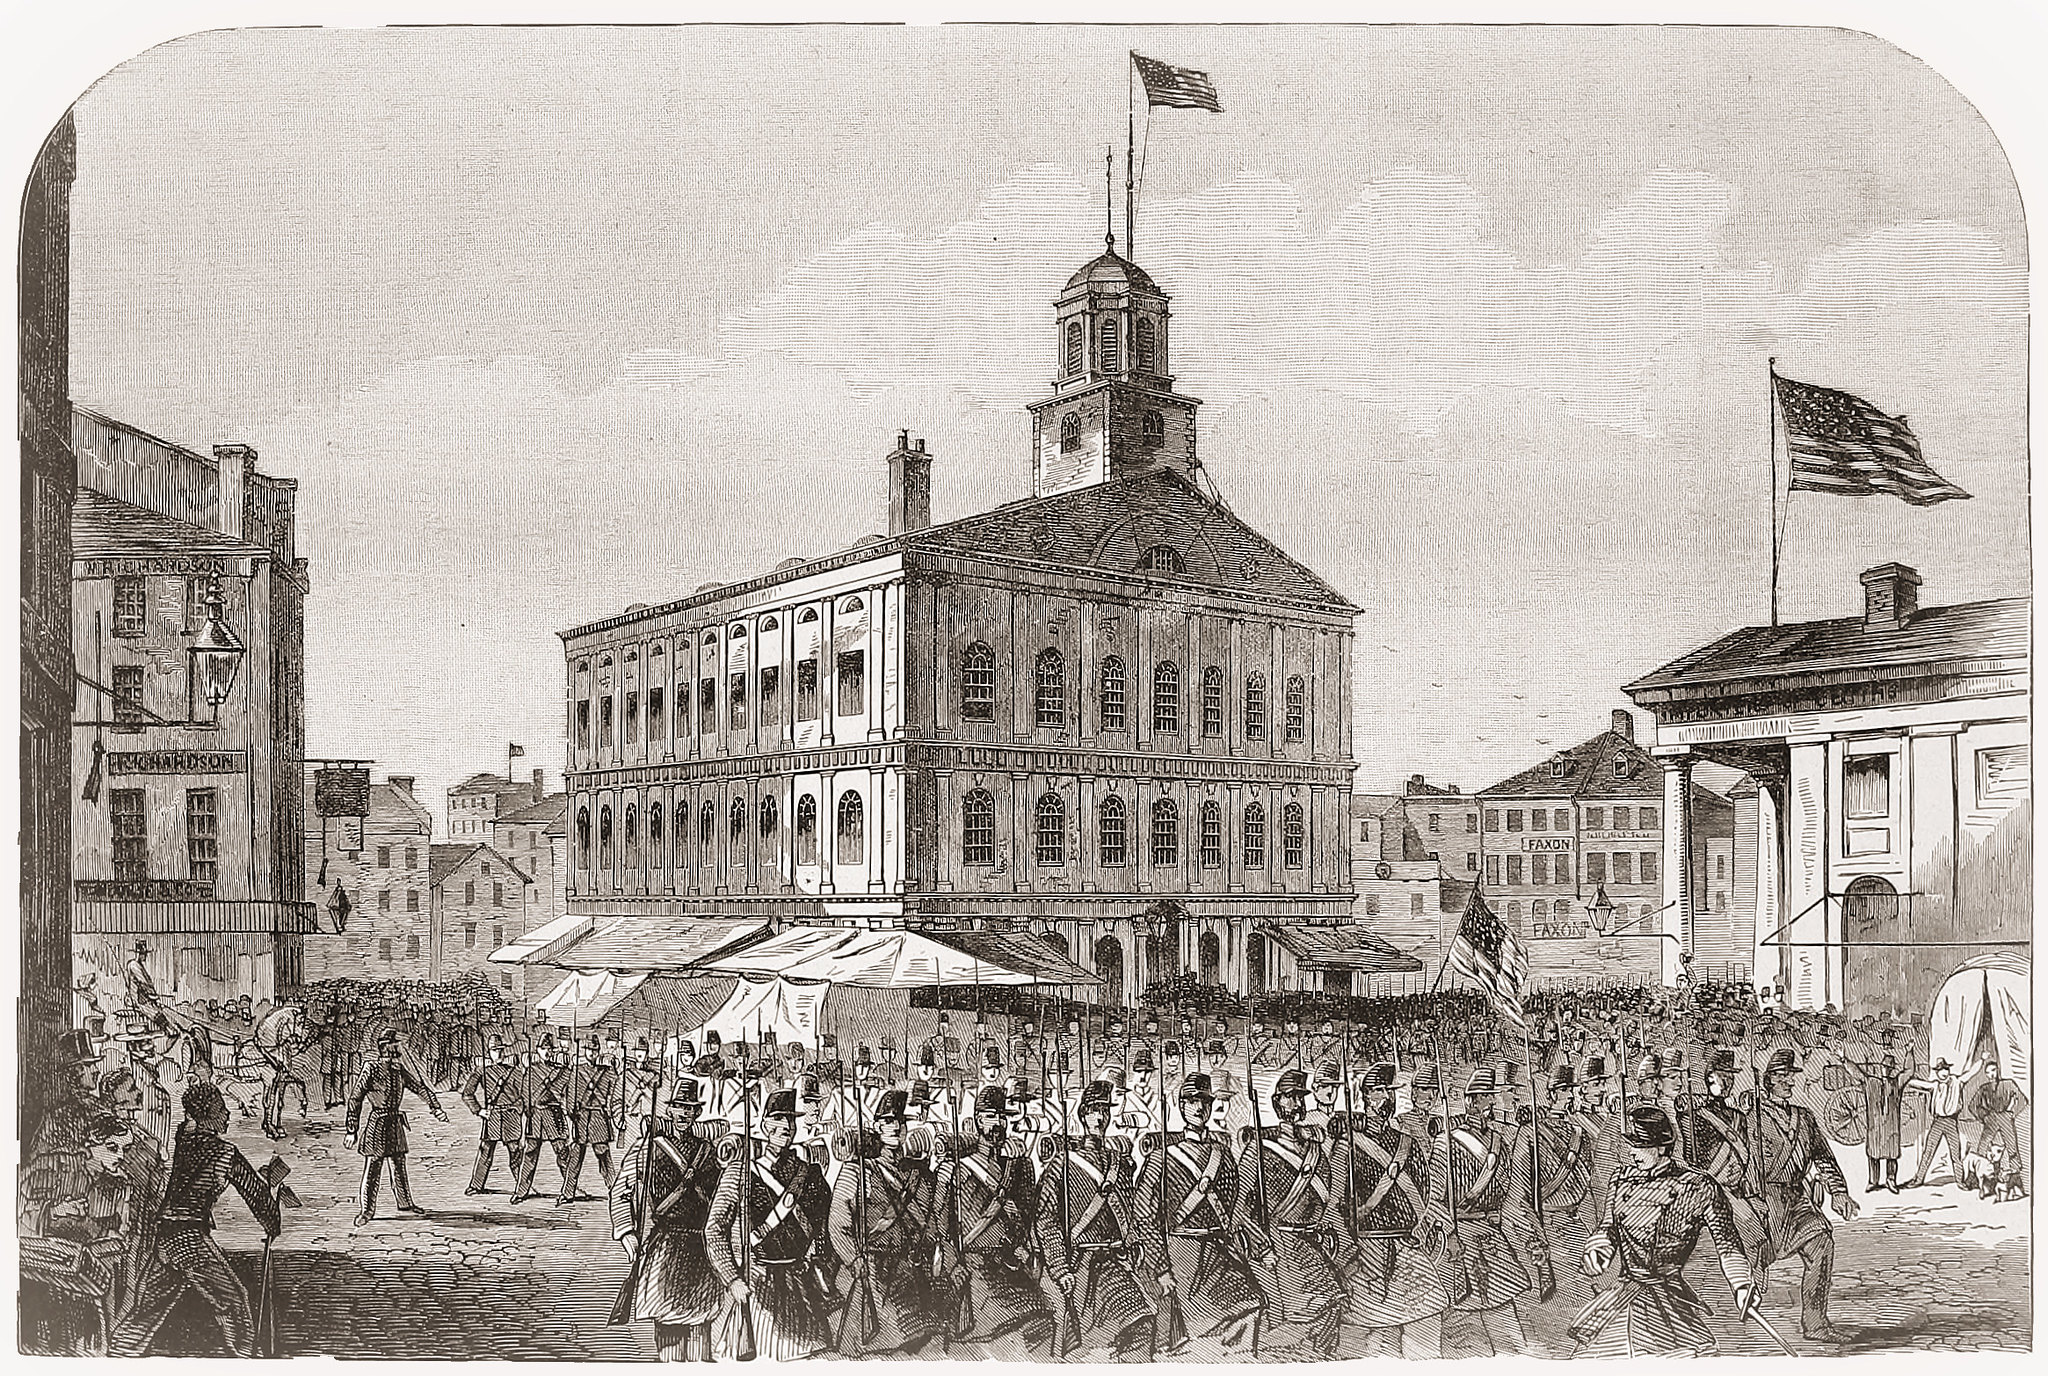 A New Regiment of Massachusetts Volunteers Passing Fanueil Hall on their way to the War